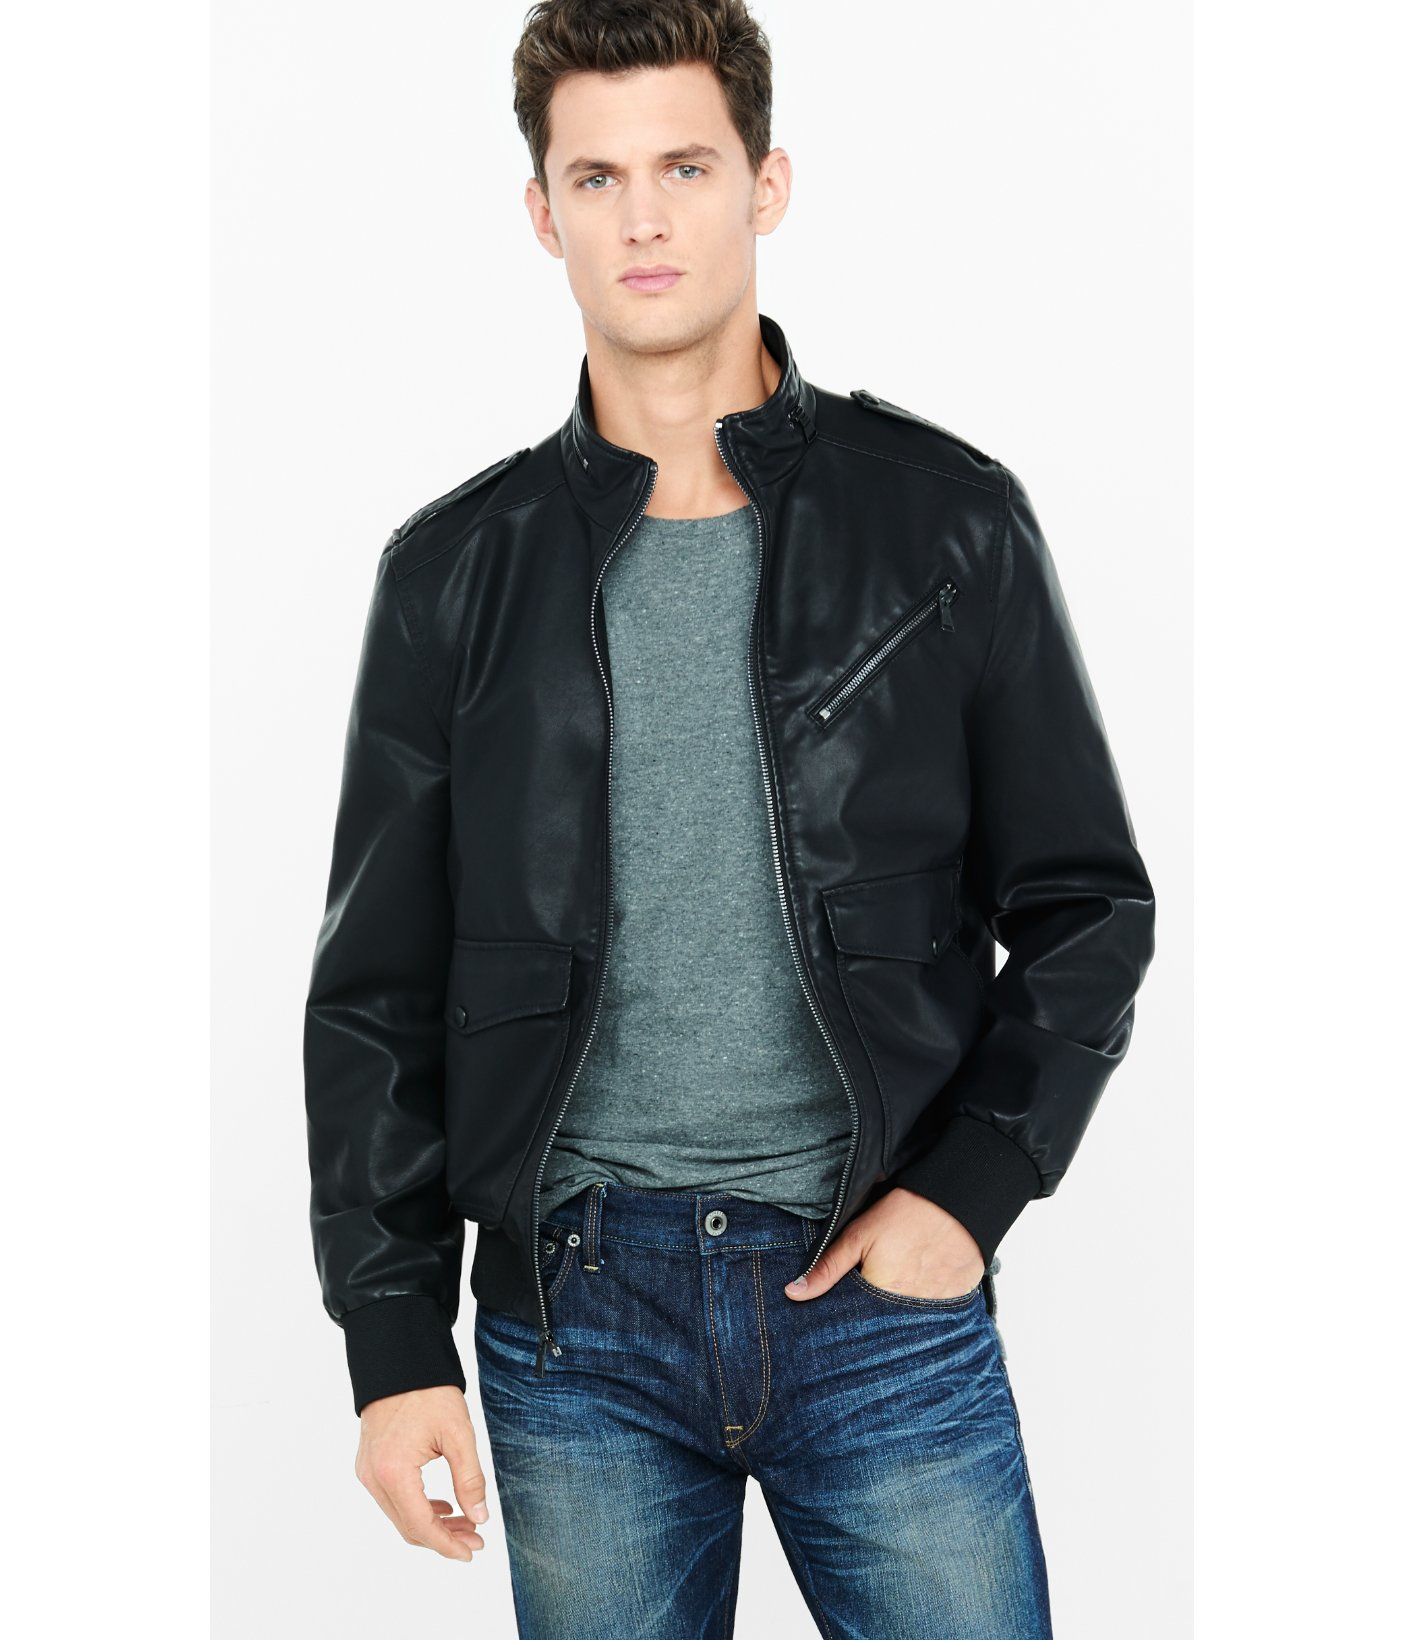 Lyst - Express (minus The) Leather Military Jacket in Black for Men